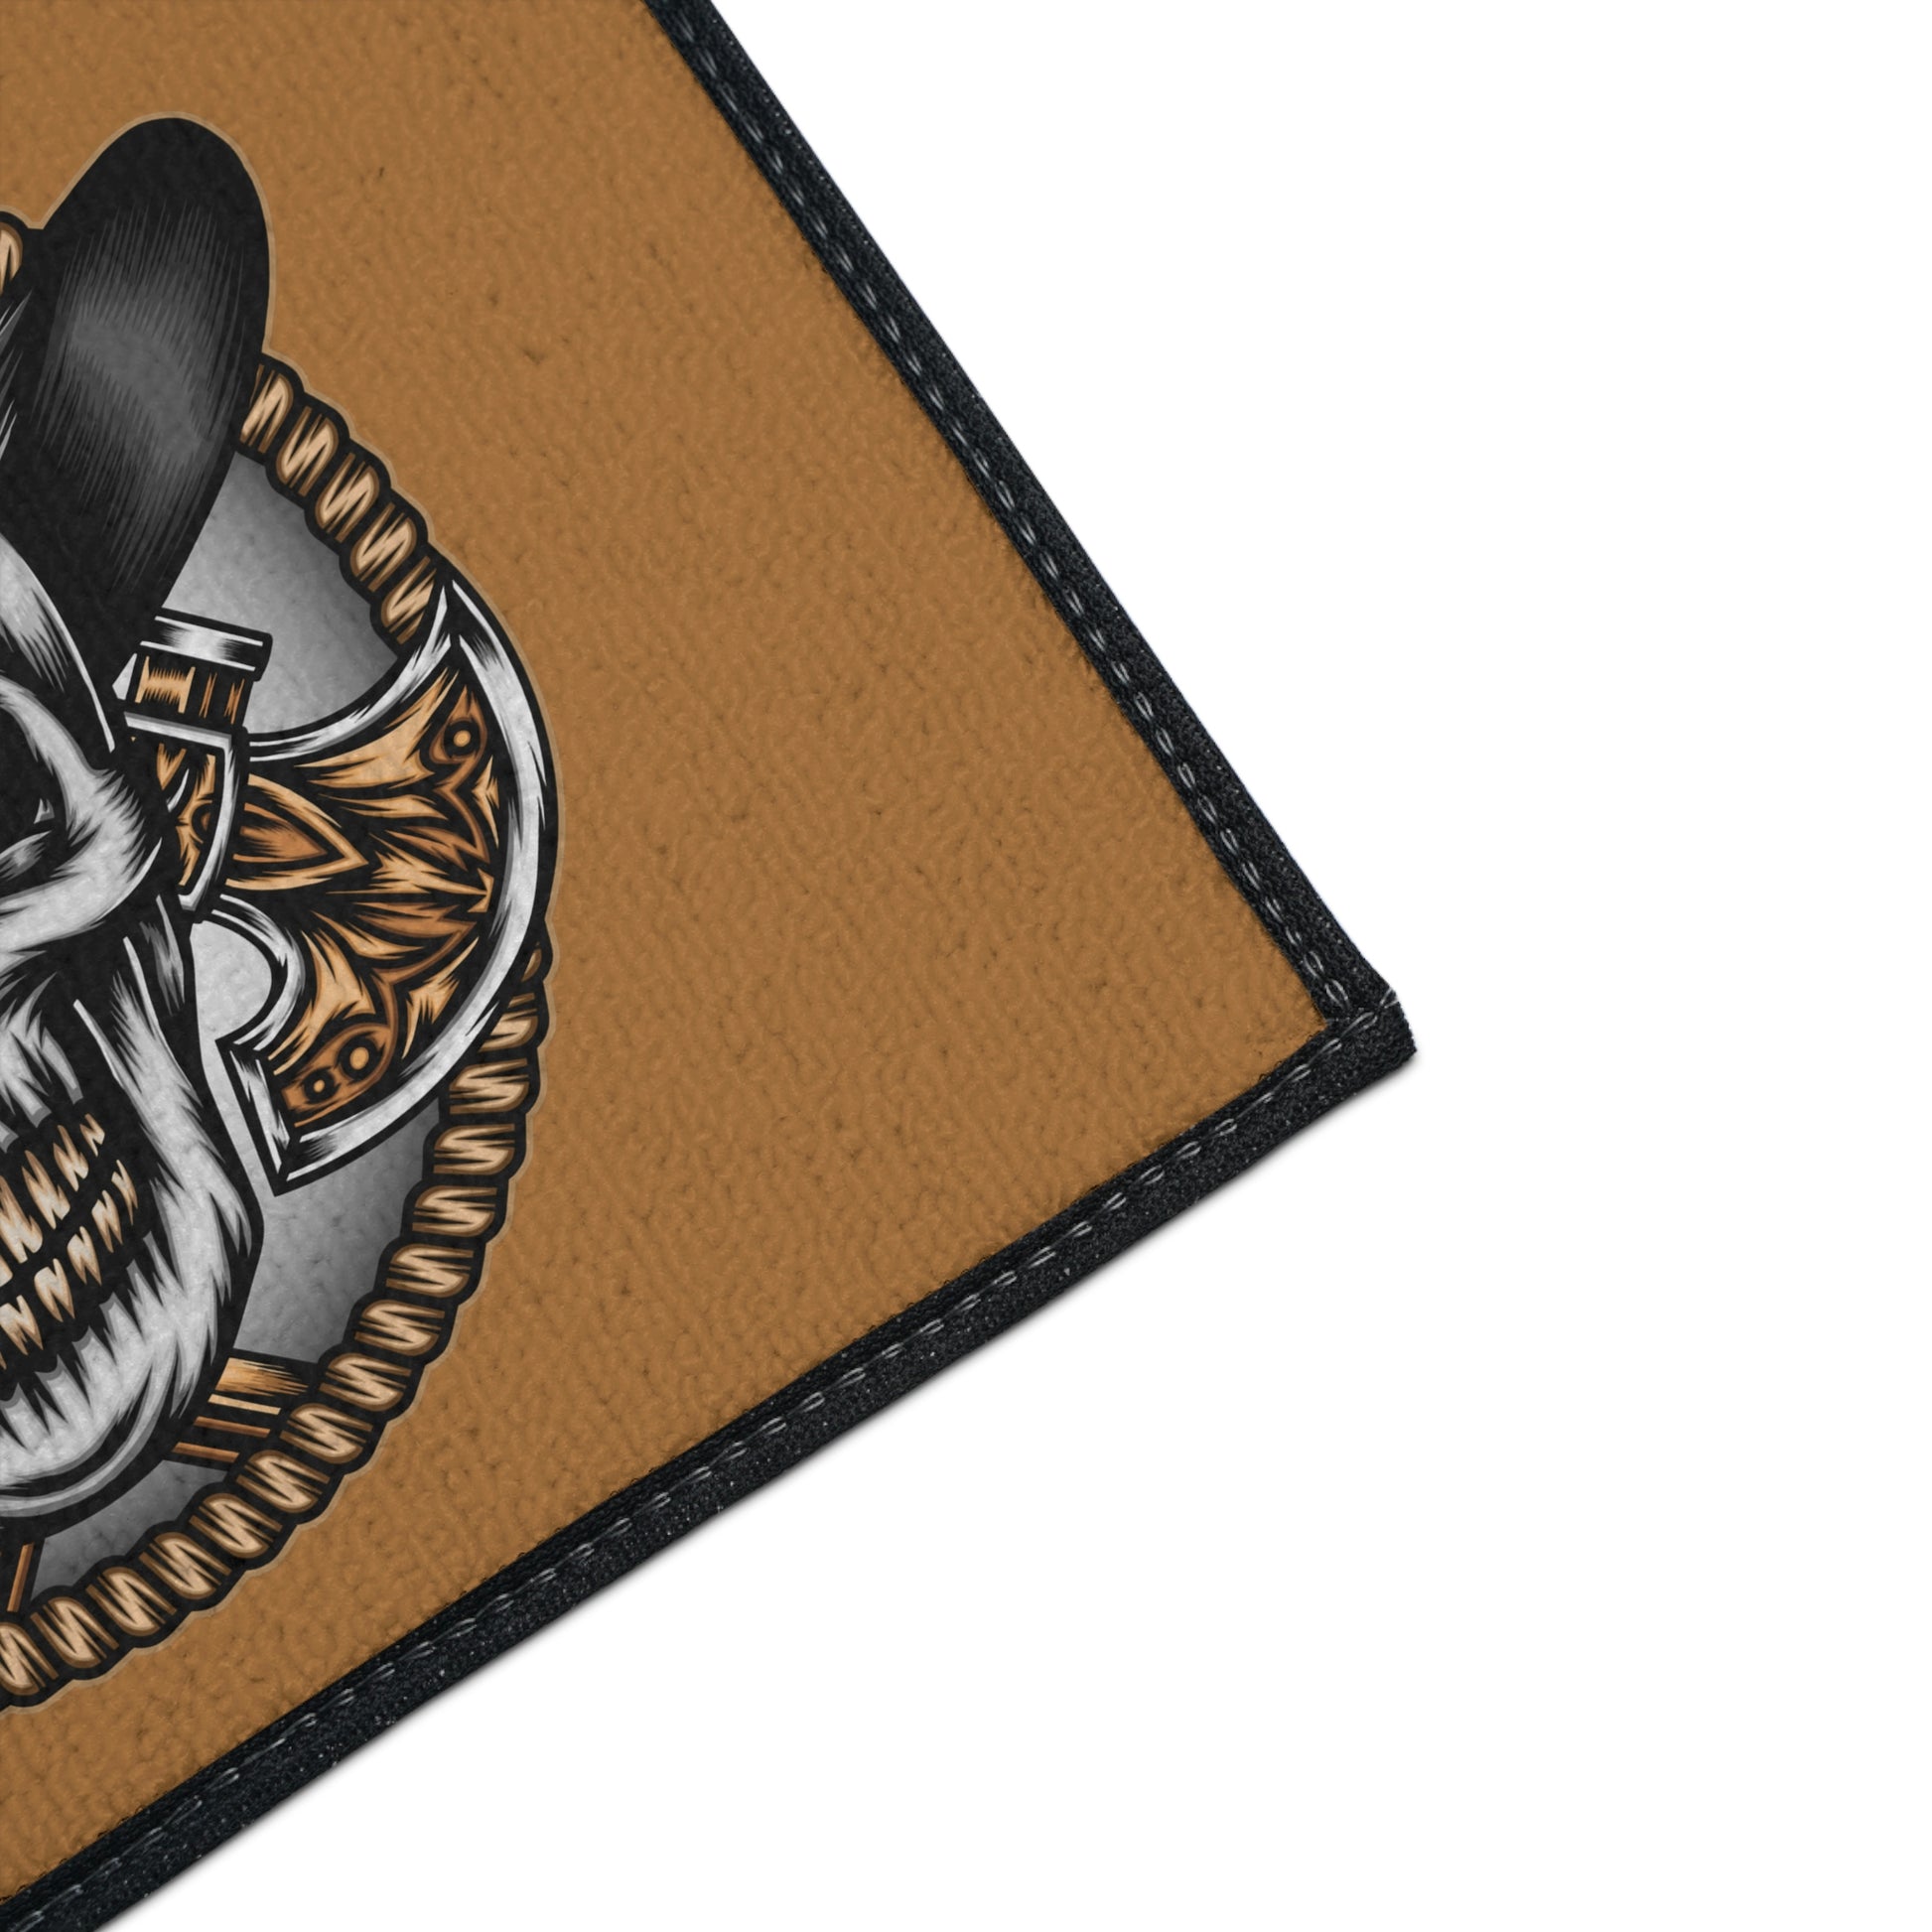 Capture the fearless spirit of the Wild West with the "Skull Cowboy" doormat.